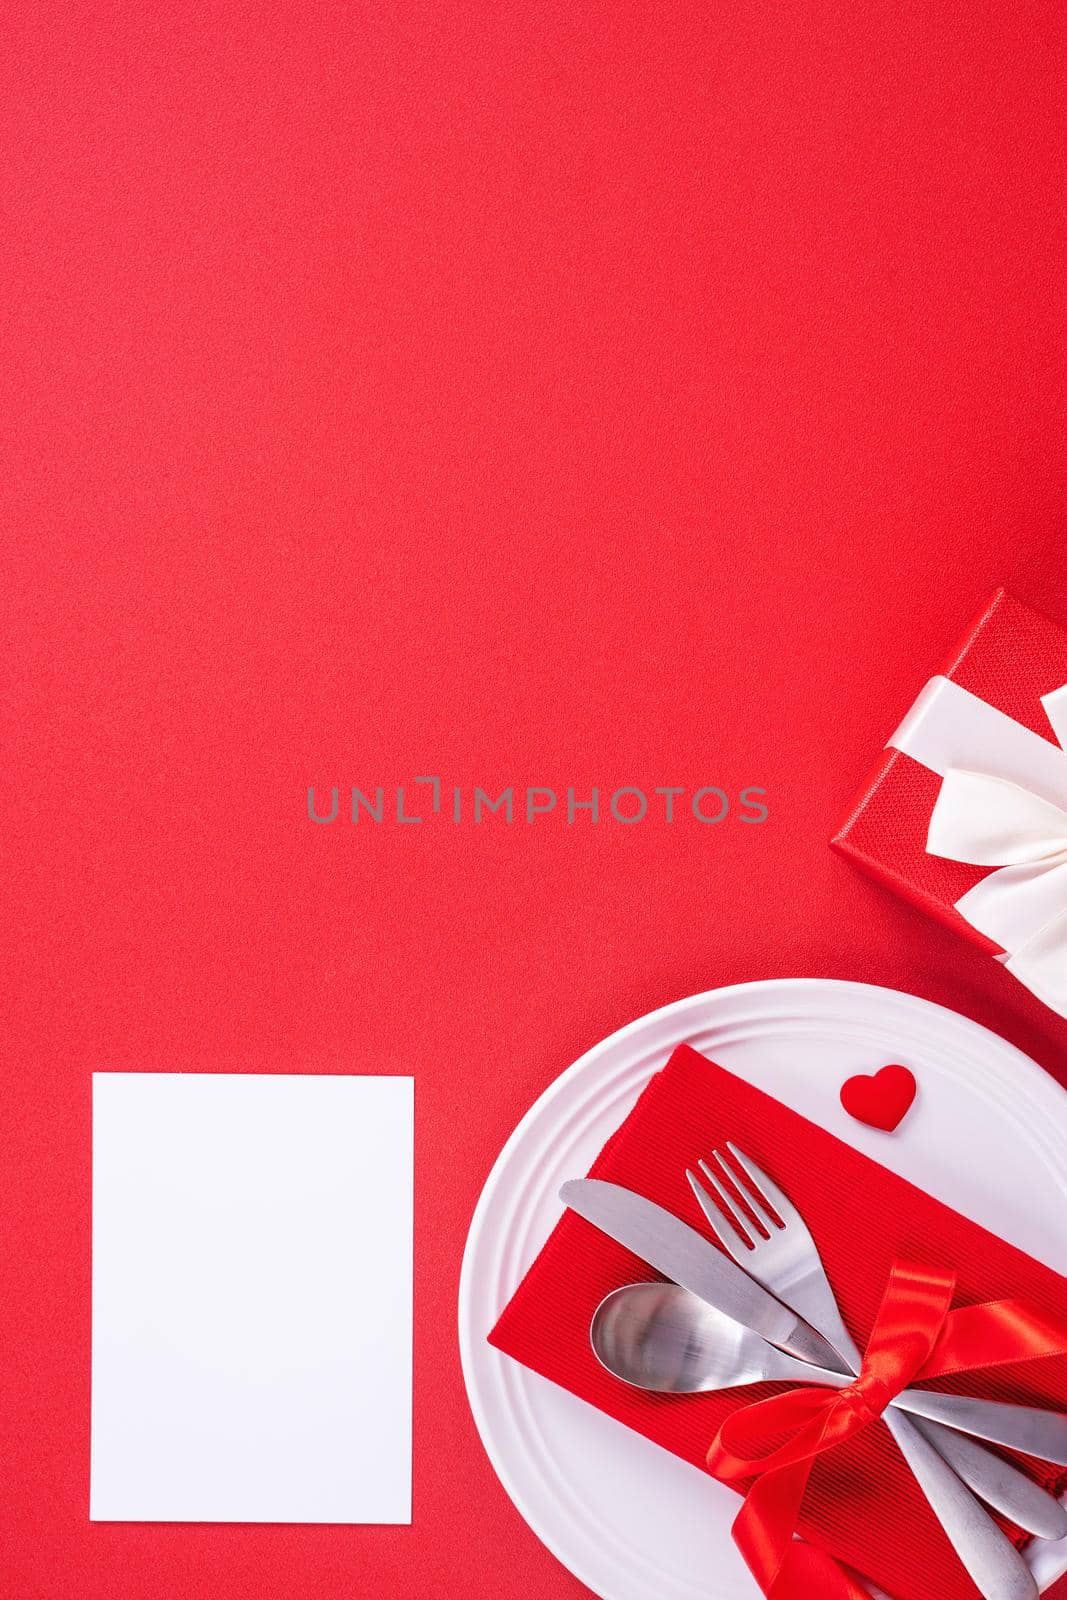 Valentine's Day meal design concept - Romantic plate dish set isolated on red background for restaurant, holiday celebration promotion, top view, flat lay. by ROMIXIMAGE